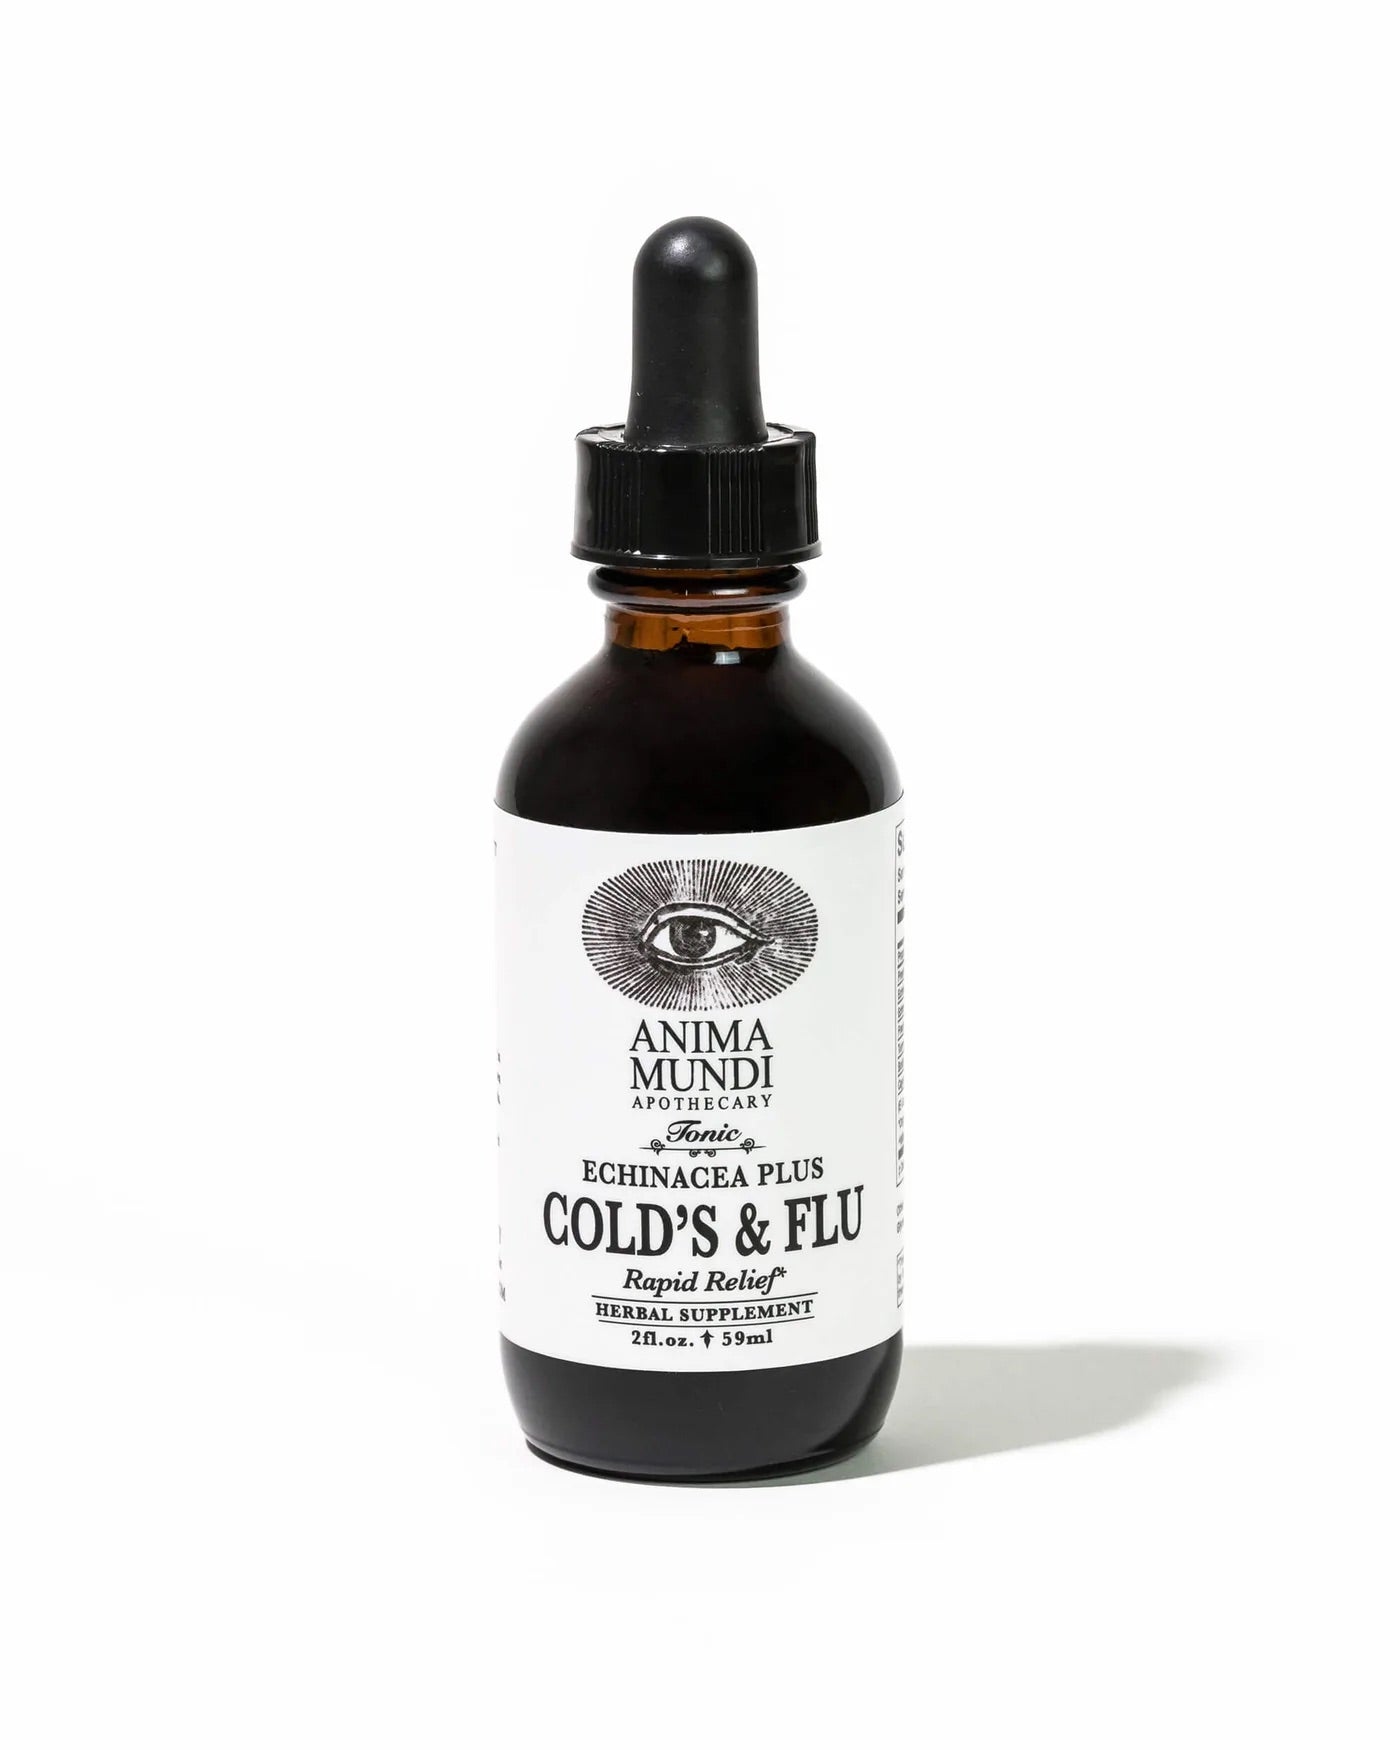 COLD'S & FLU Tonic | High Potency + Rapid Relief